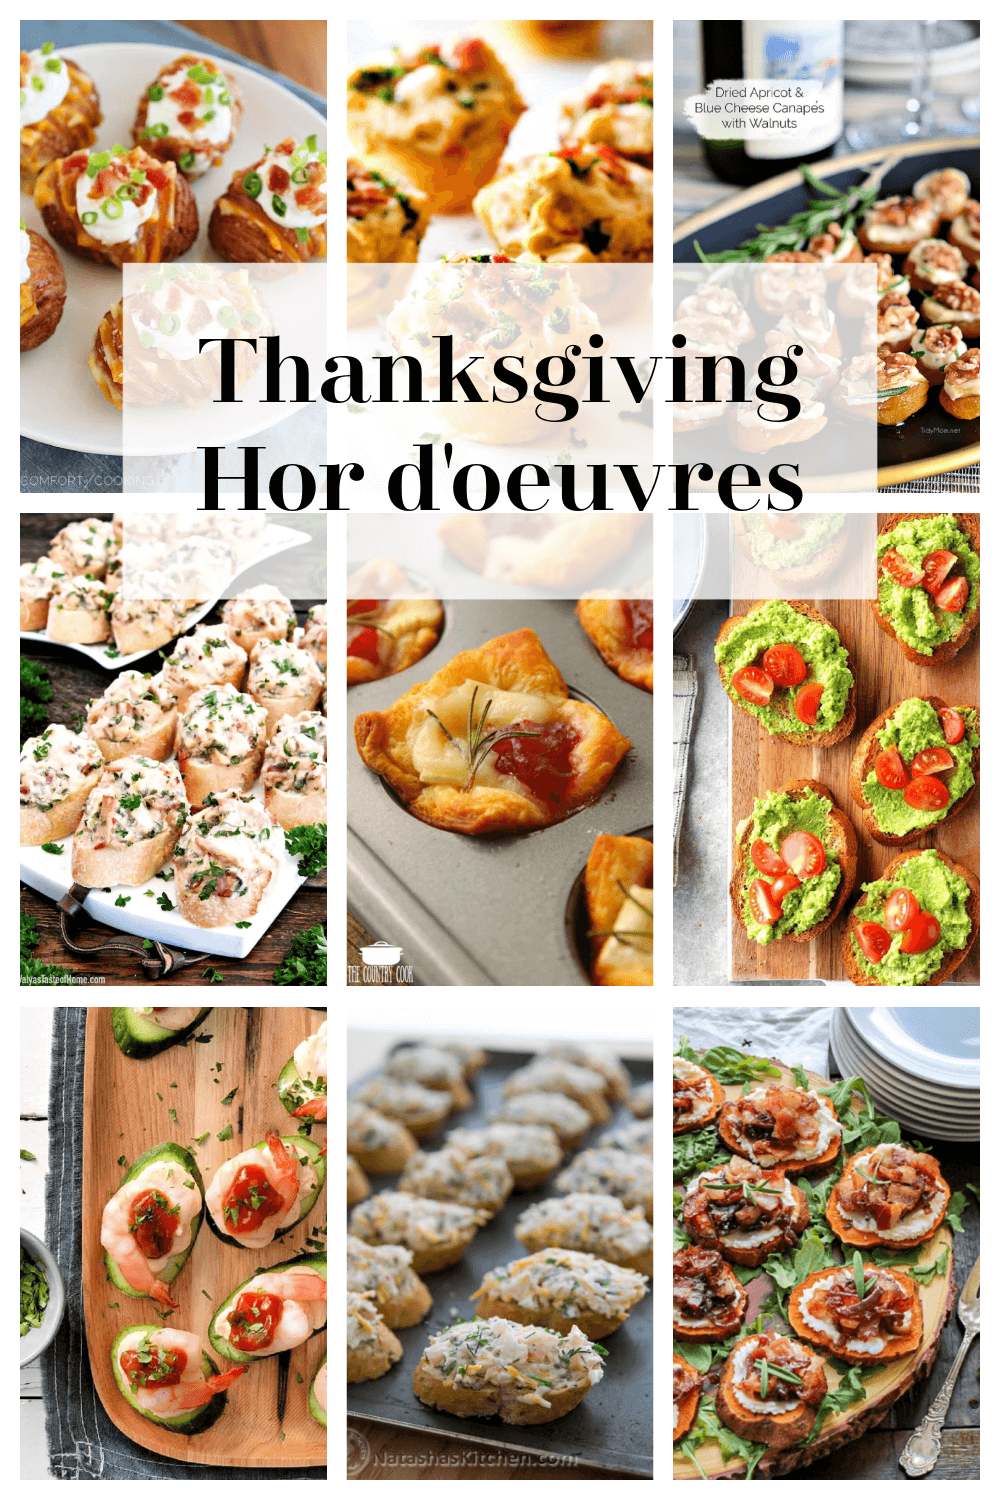 Recipes For Thanksgiving Hors d’oeuvres